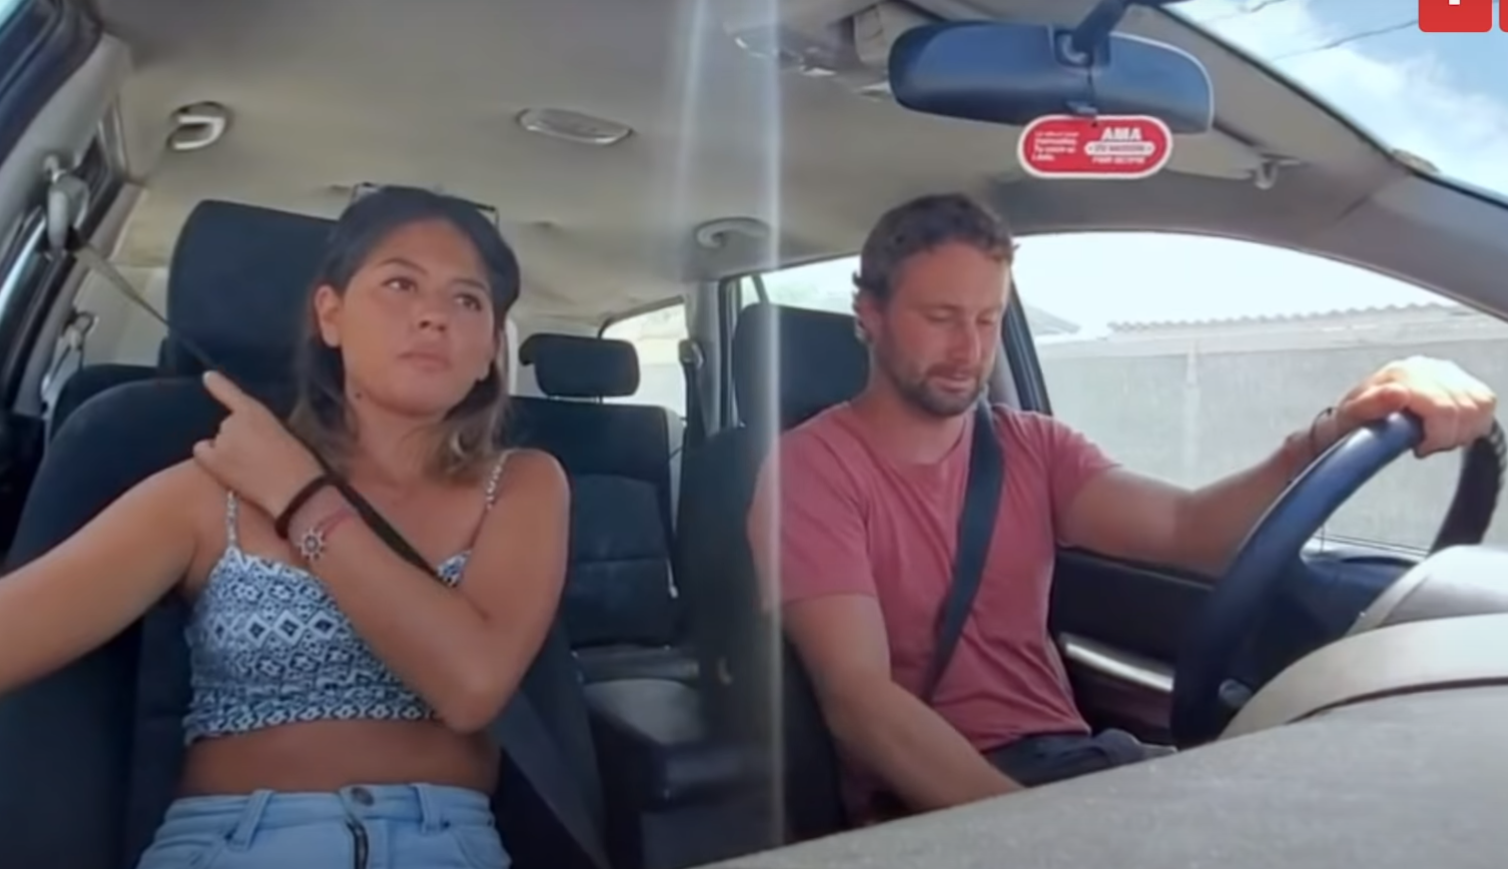 Corey and Evelin of 90 Day Fiancé buckled up and driving in a car.